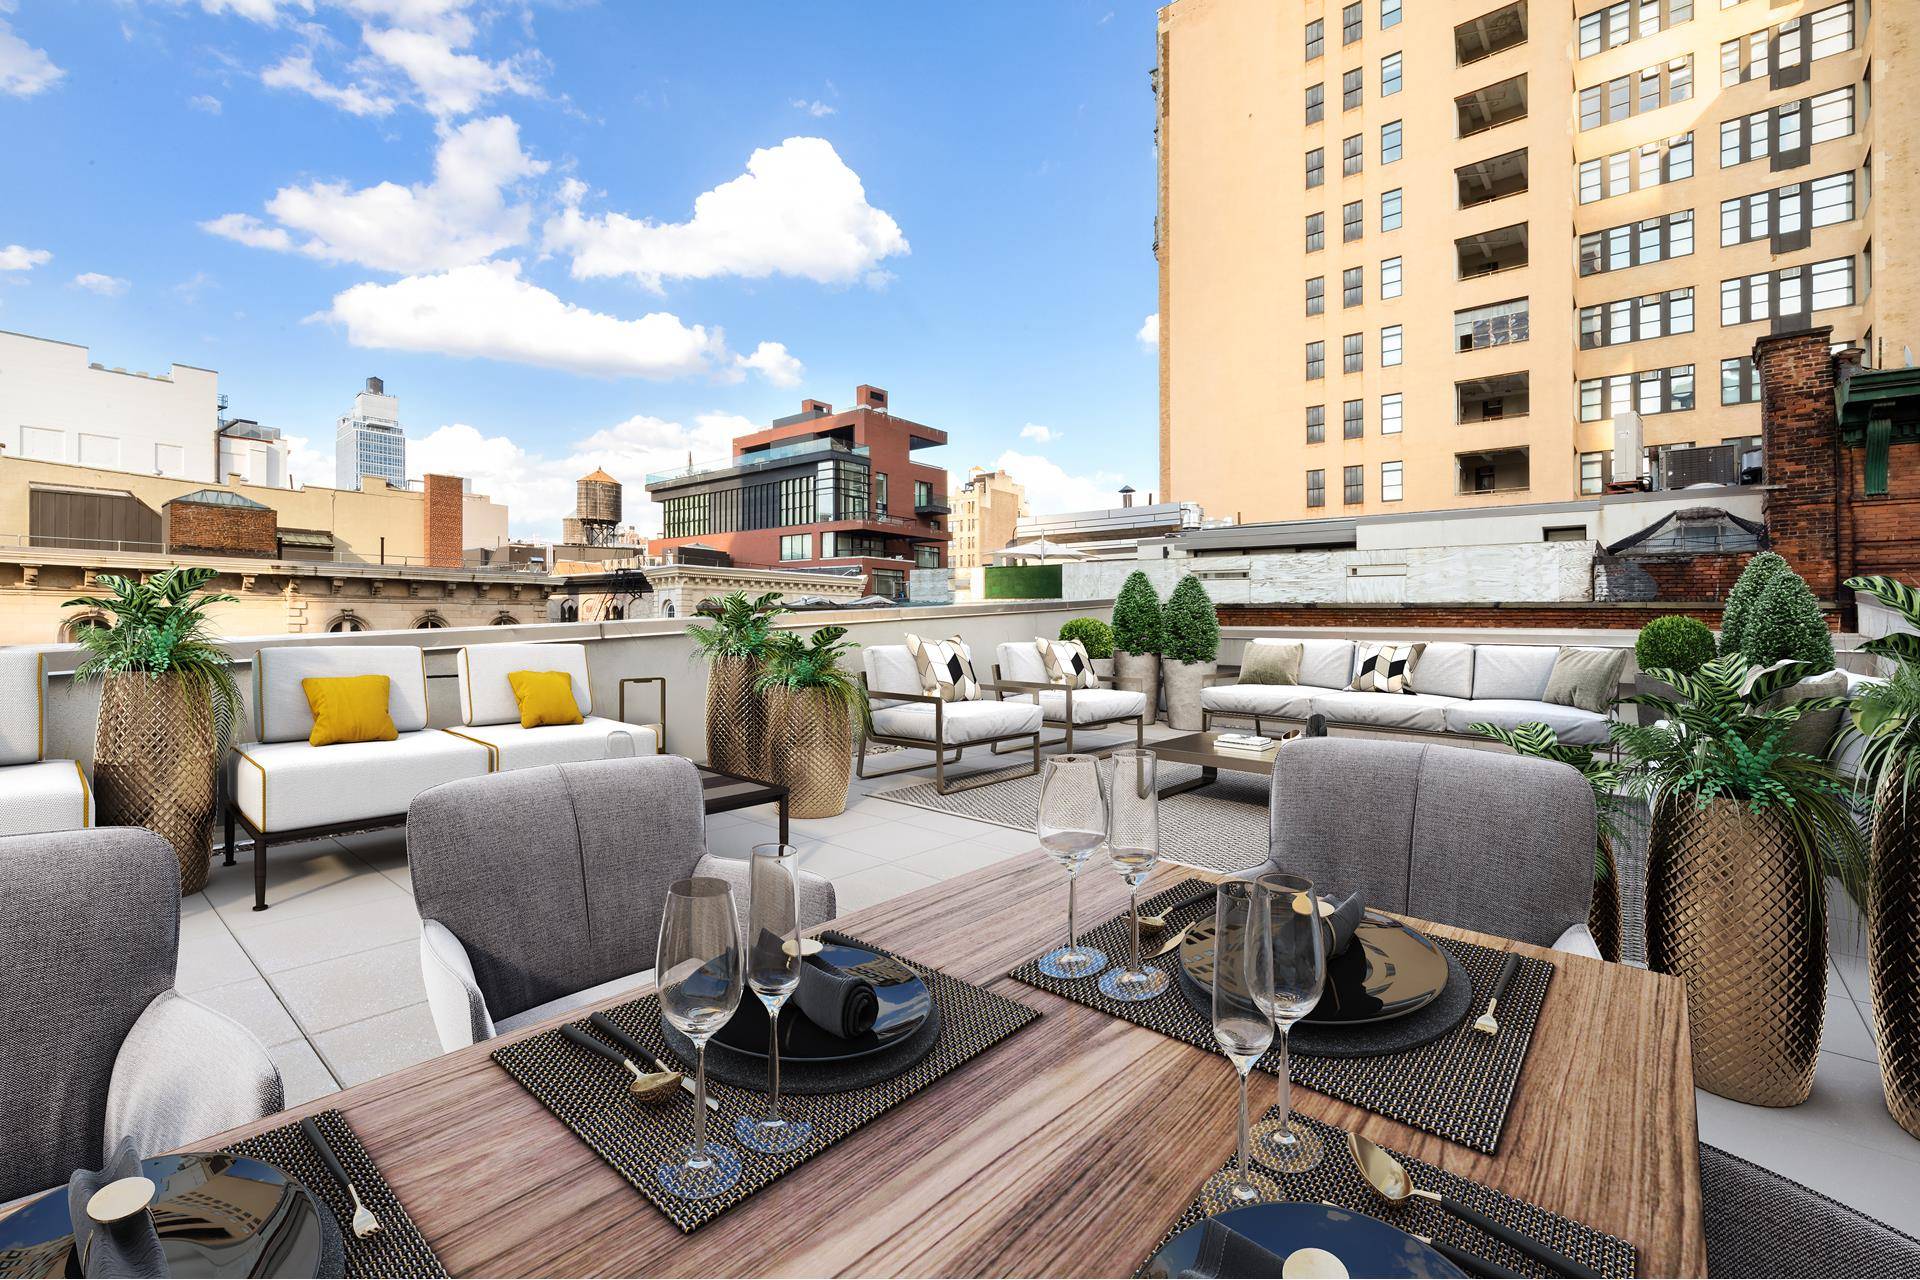 Penthouse B occupies the highest level of Six Cortlandt Alley's original structure.